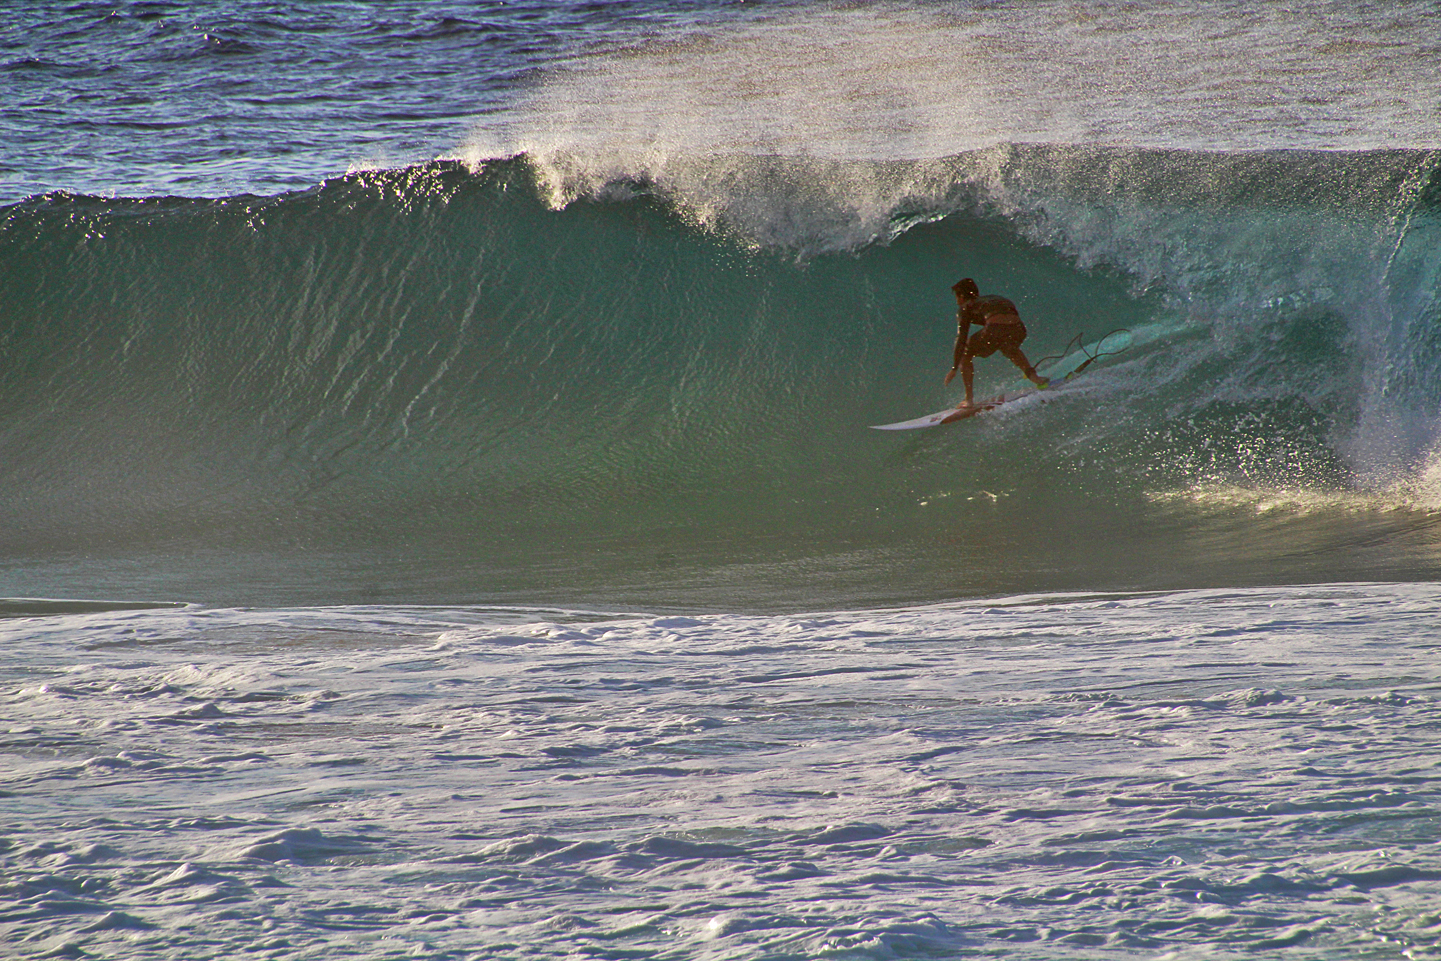 Surfer setting up for the barrel at Pipeline.